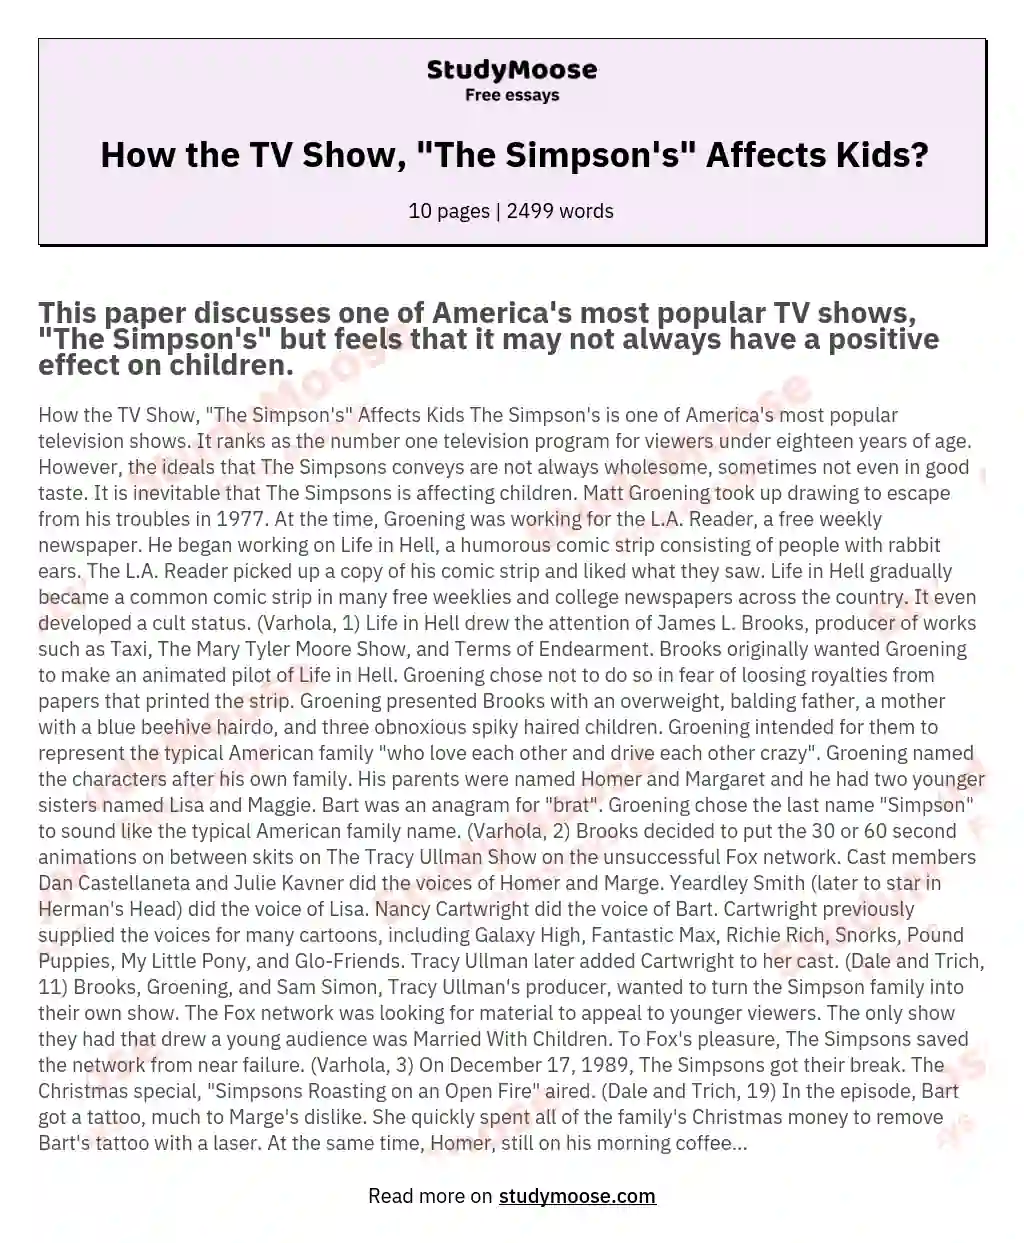 How the TV Show, "The Simpson's" Affects Kids? essay